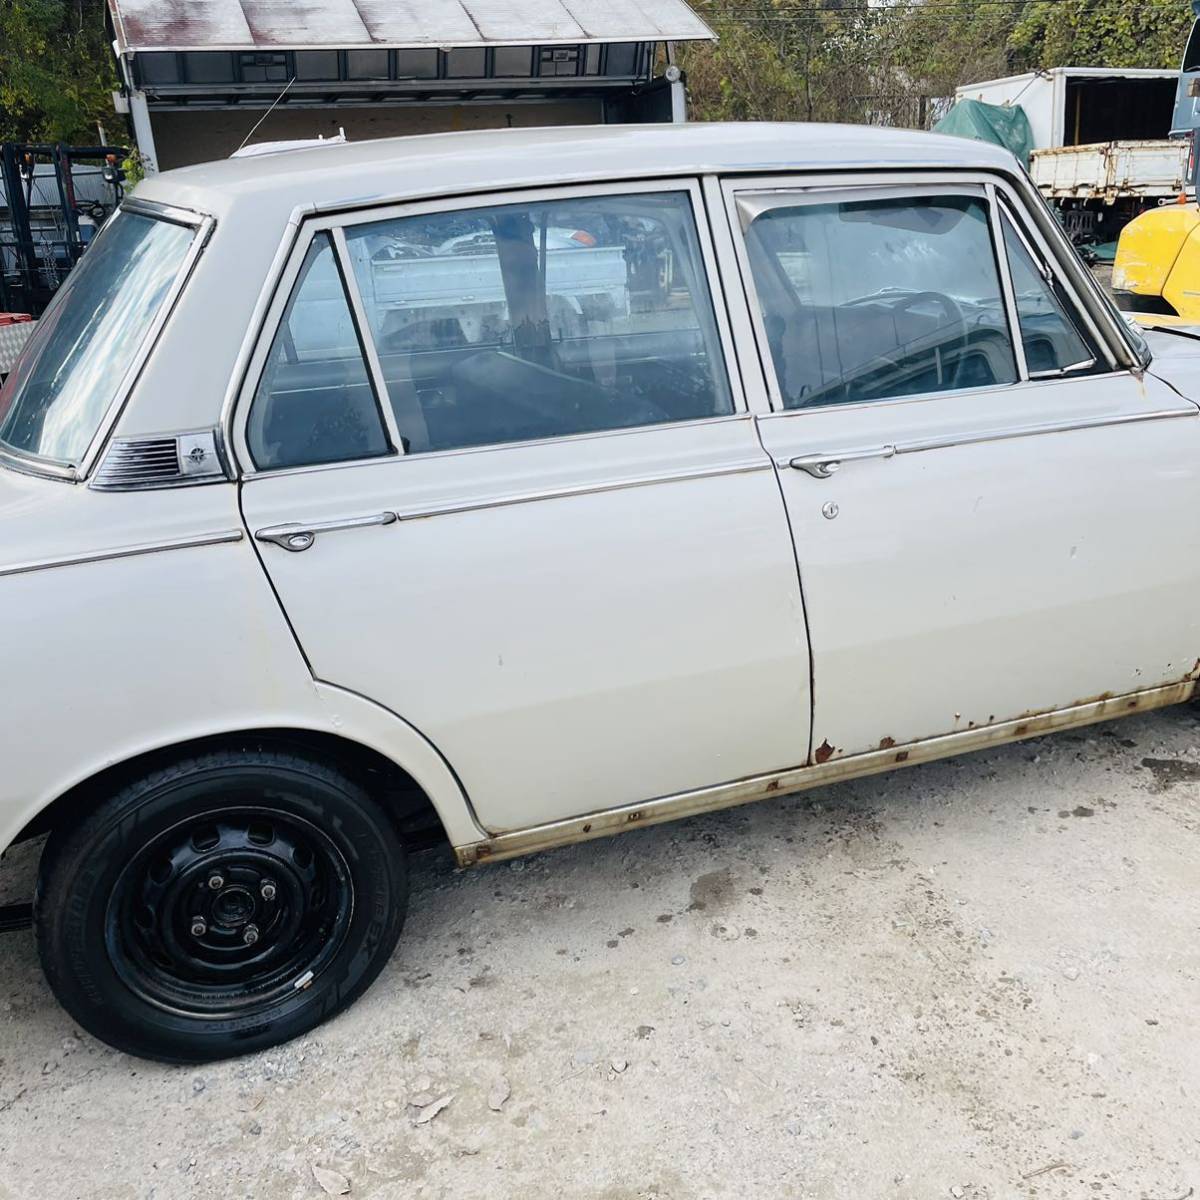  Toyopet Corona [{RT40}] circle car without document part removing 